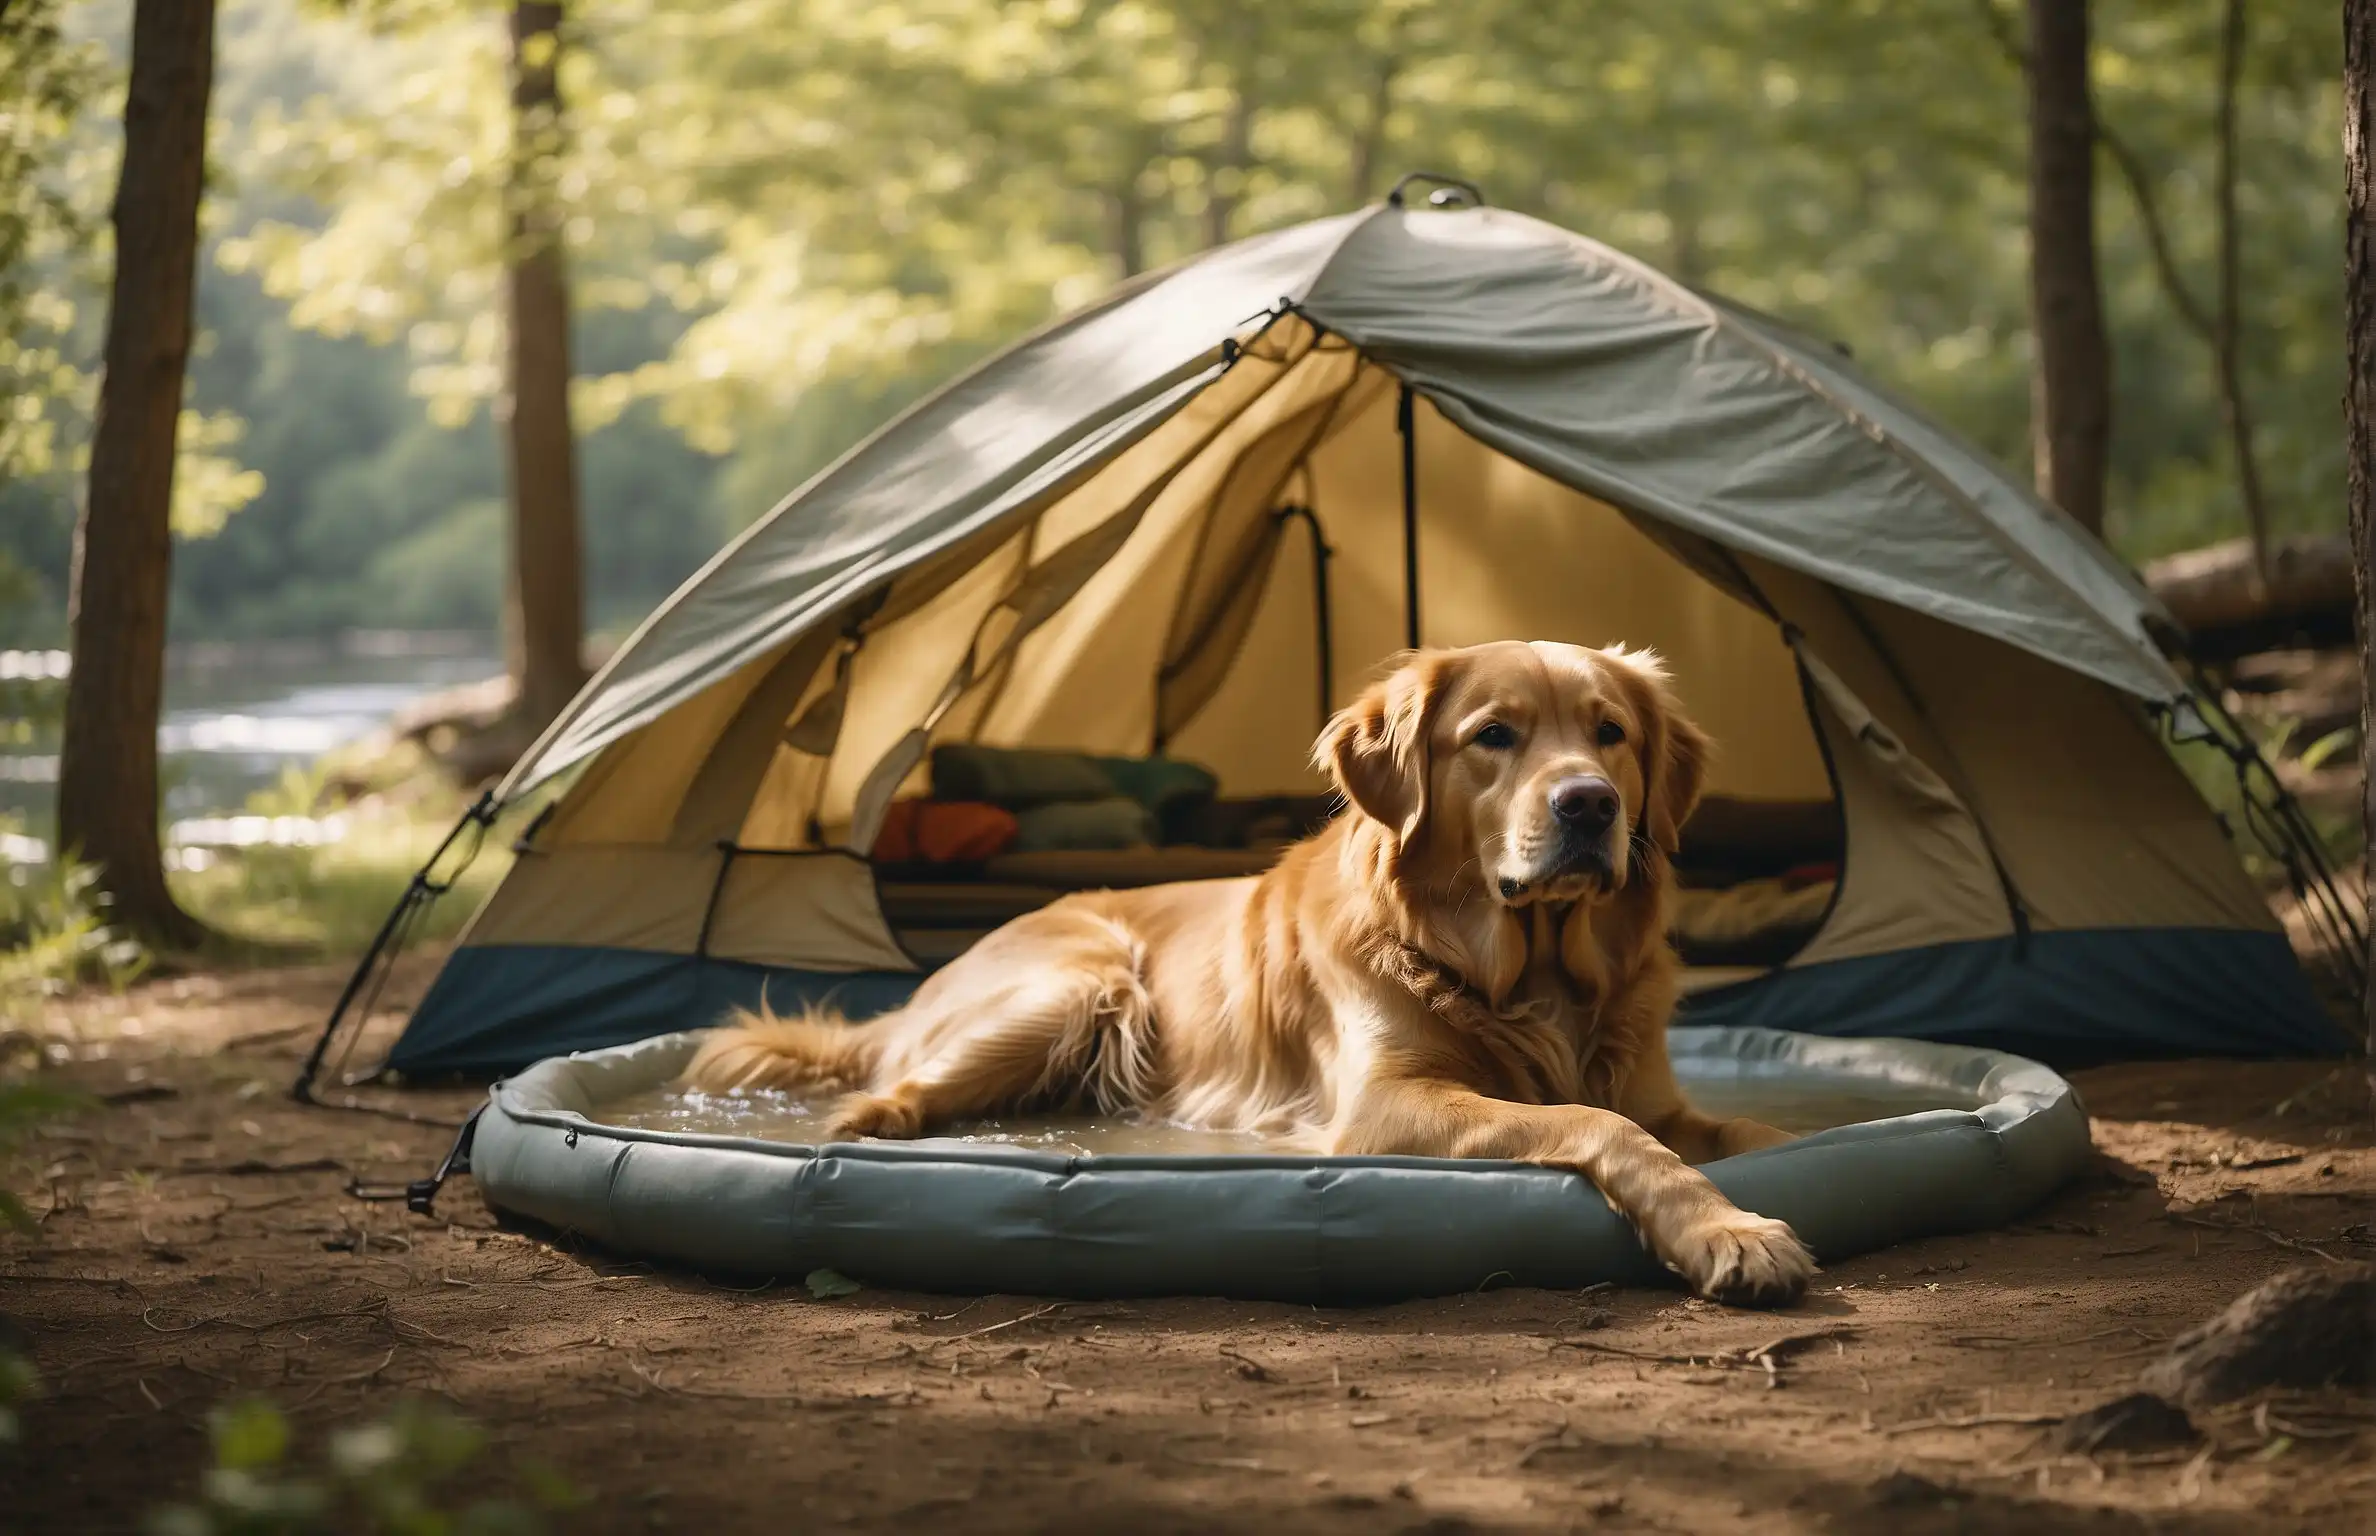 Keep Dogs Cool While Camping